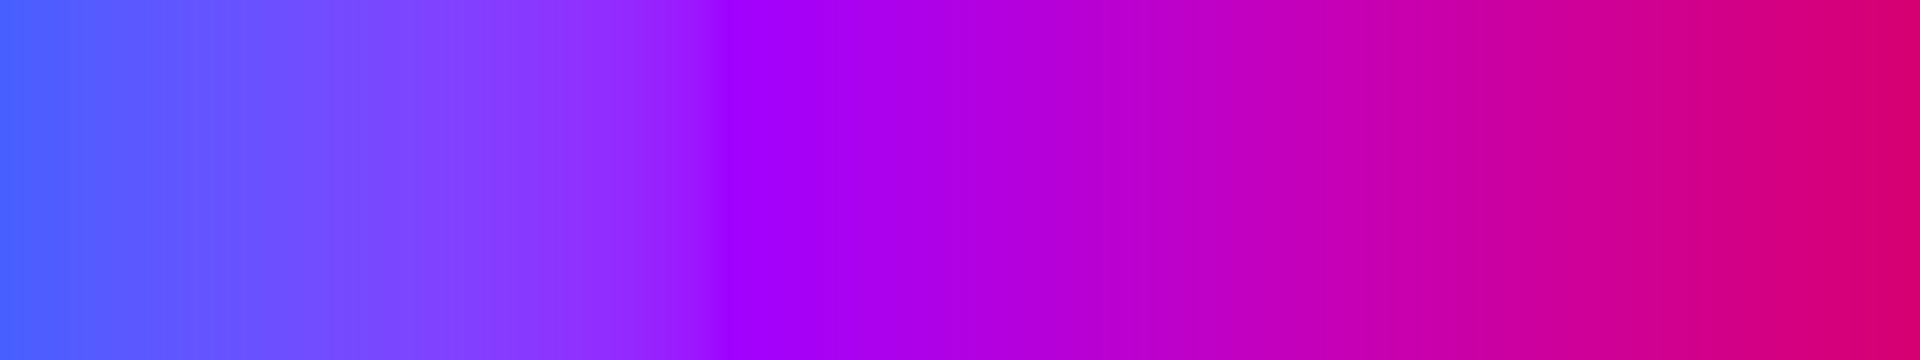 A purple hue-gradient with constant luminosity, generated by Oklab-for-Processing's Ok.HSL function.